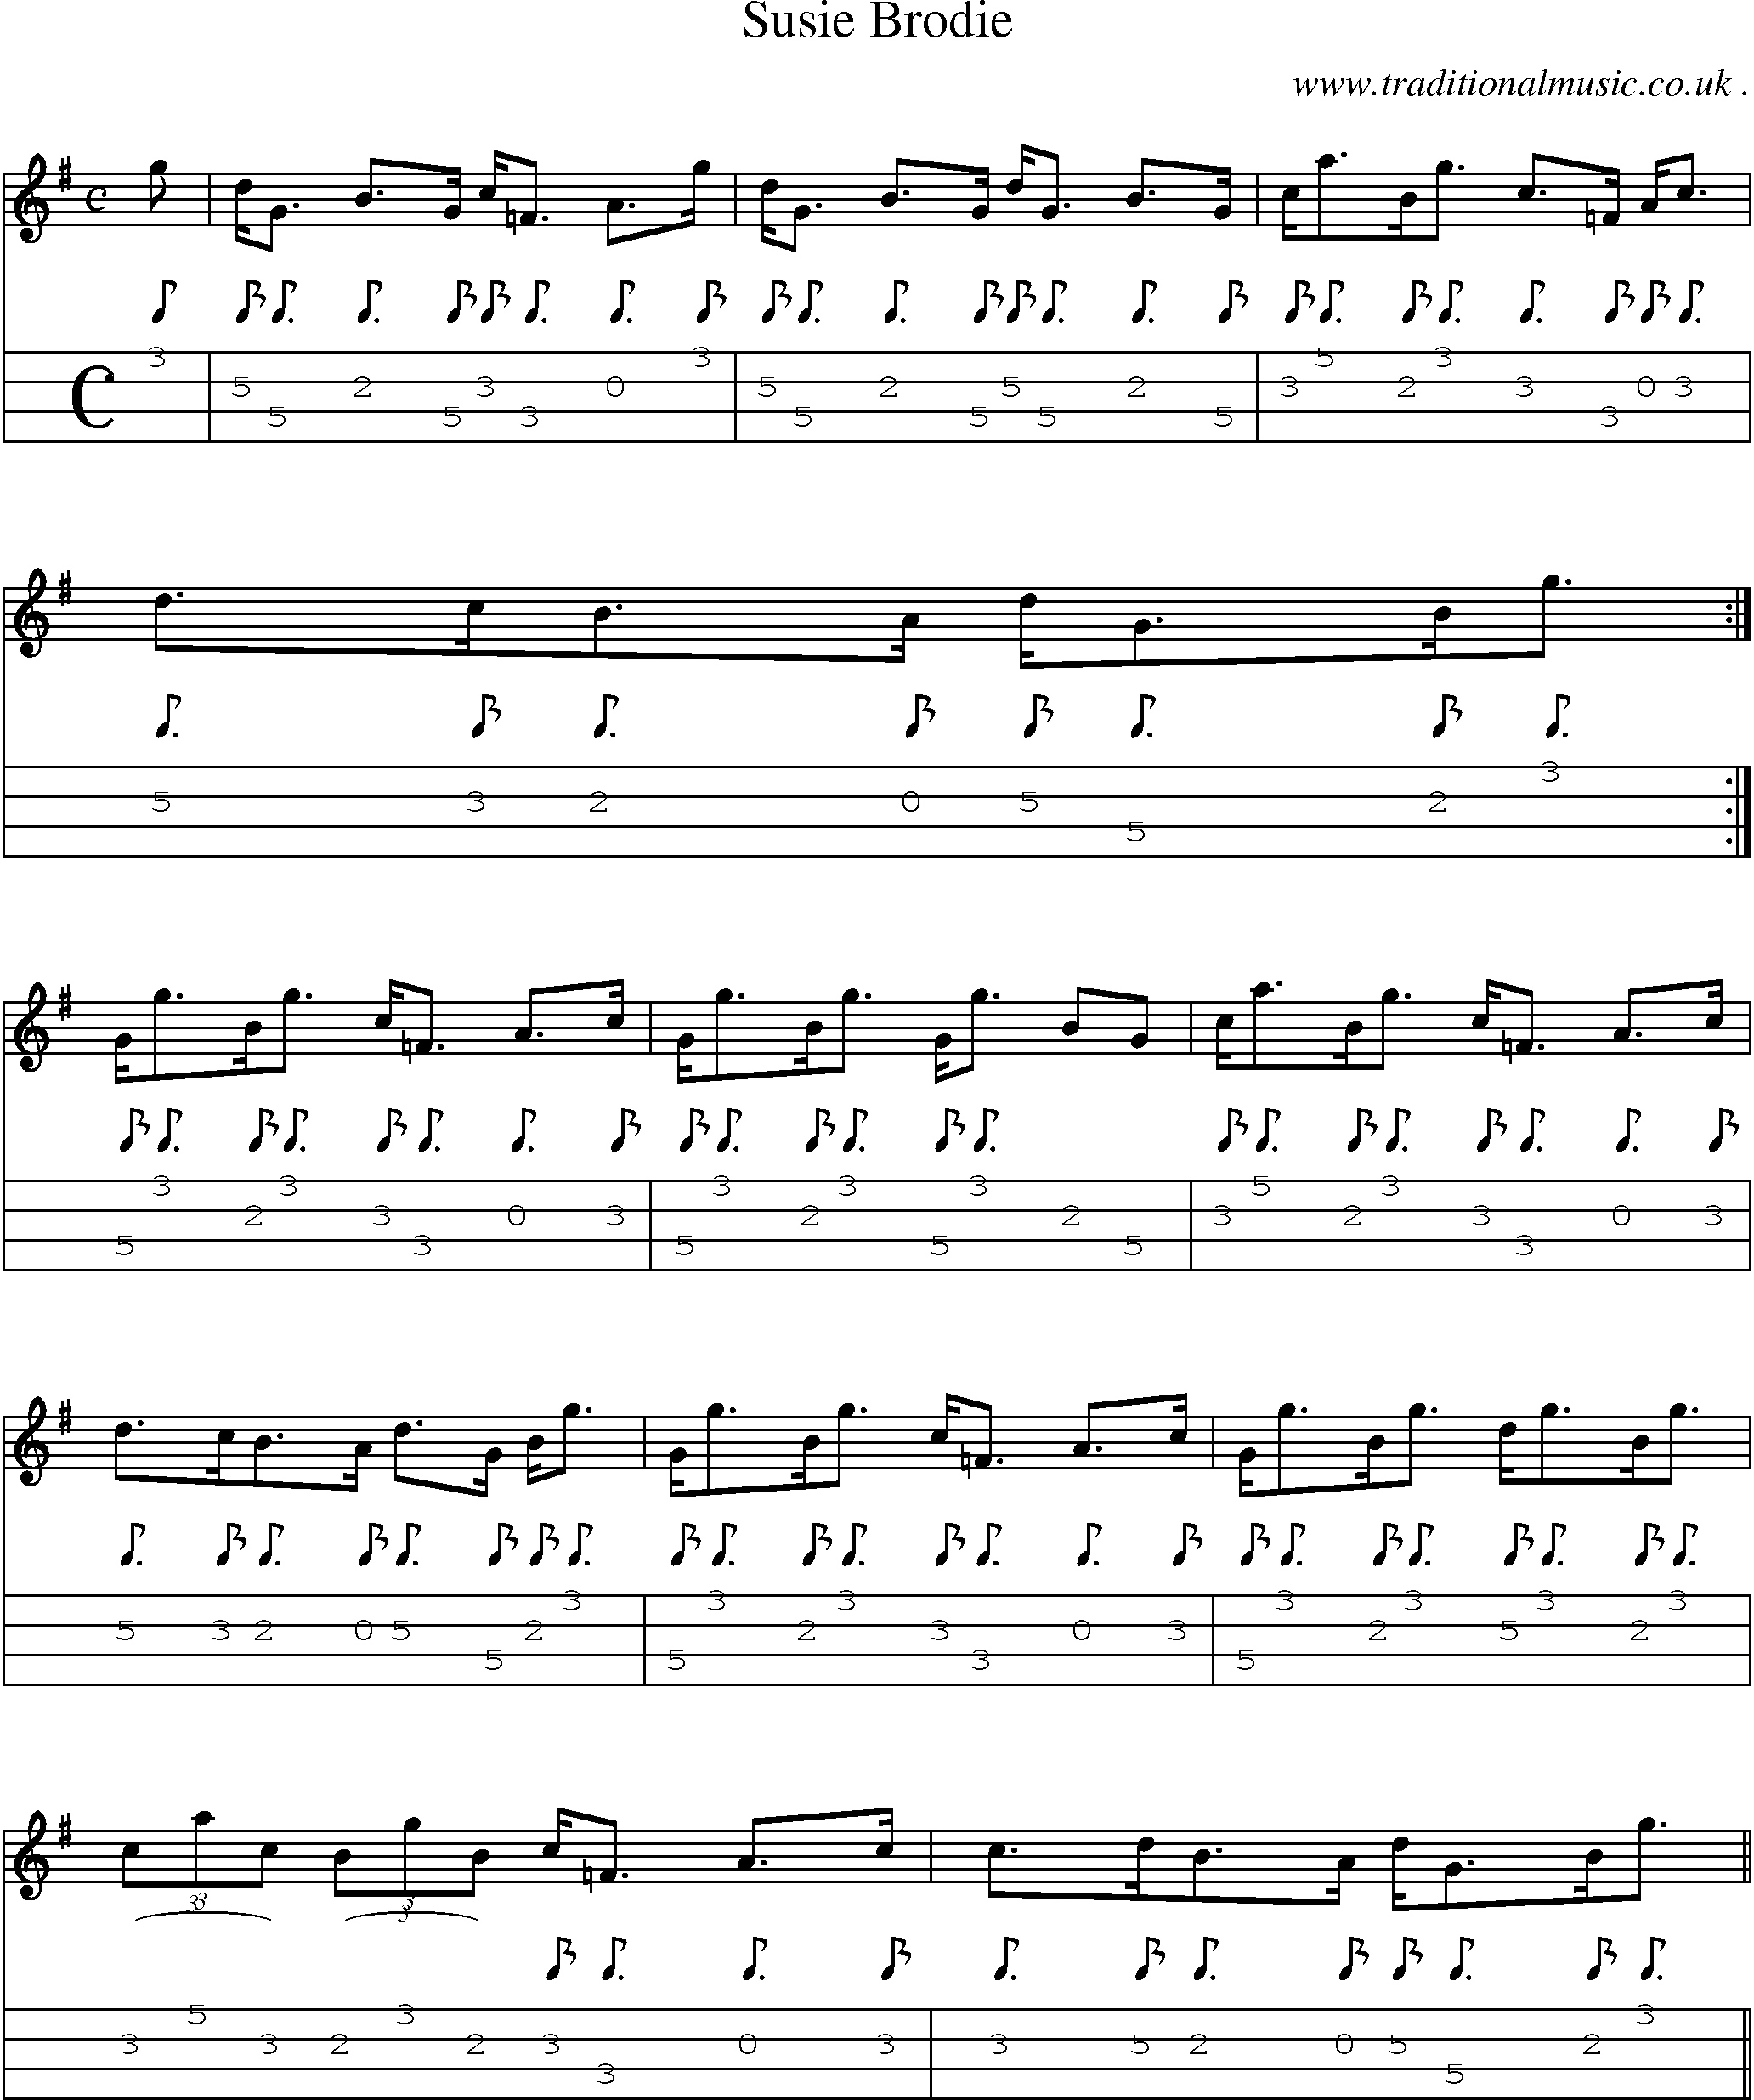 Sheet-music  score, Chords and Mandolin Tabs for Susie Brodie